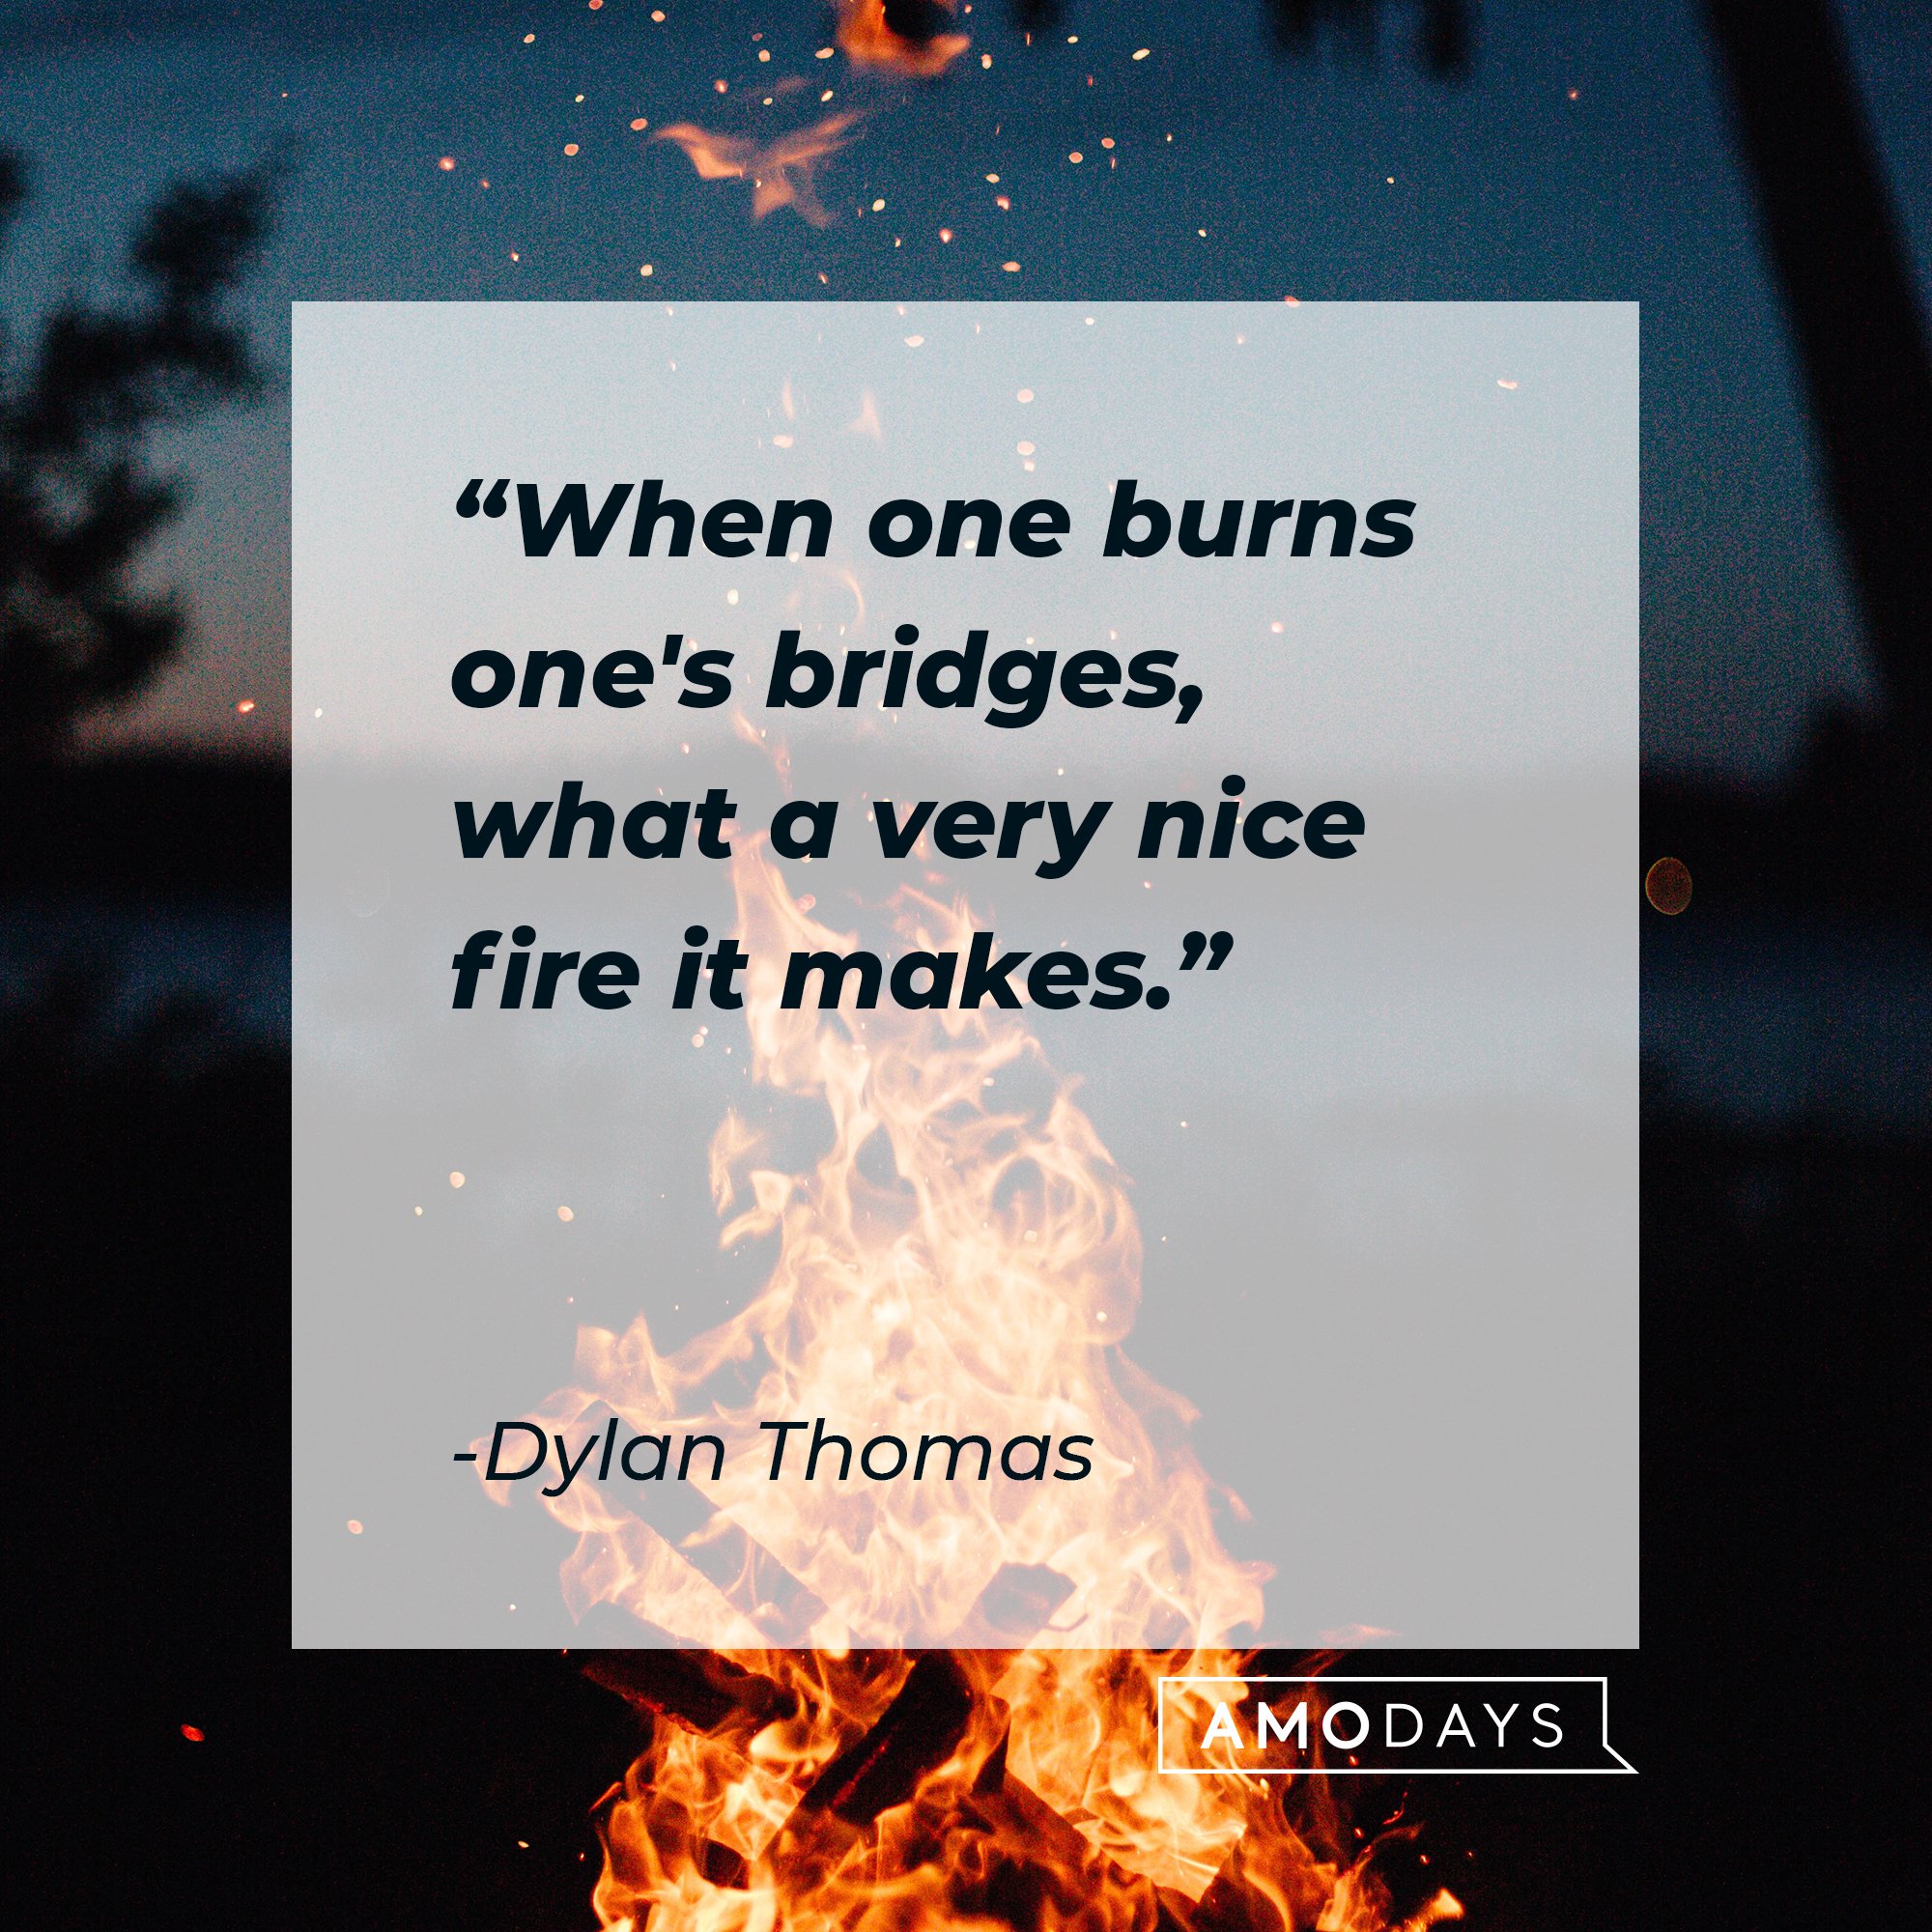  Dylan Thomas’ quote: "When one burns one's bridges, what a very nice fire it makes." | Image: AmoDays